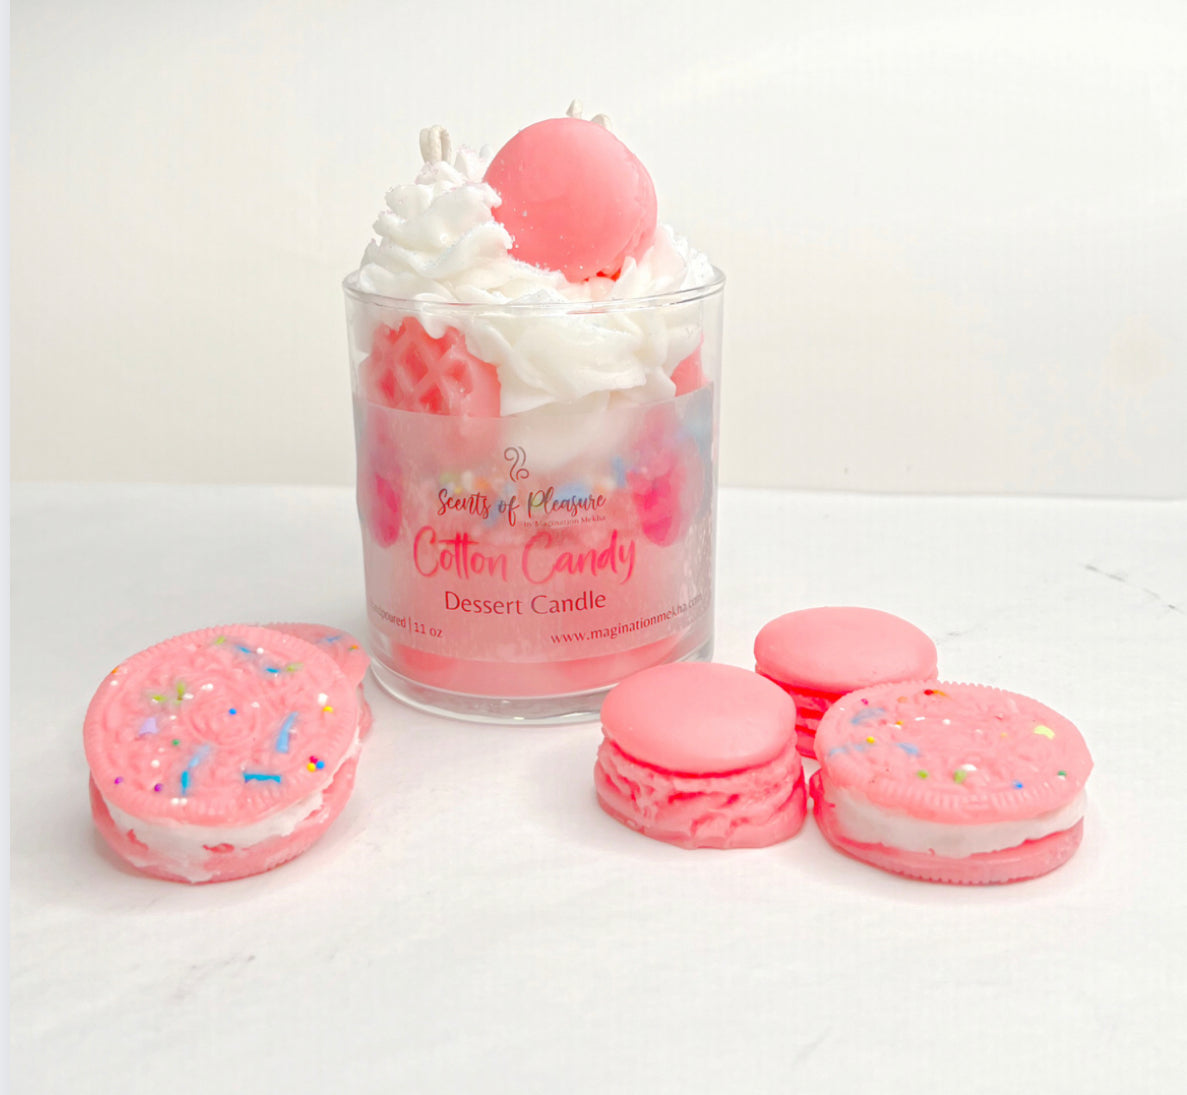 Cotton Candy Dessert Candle